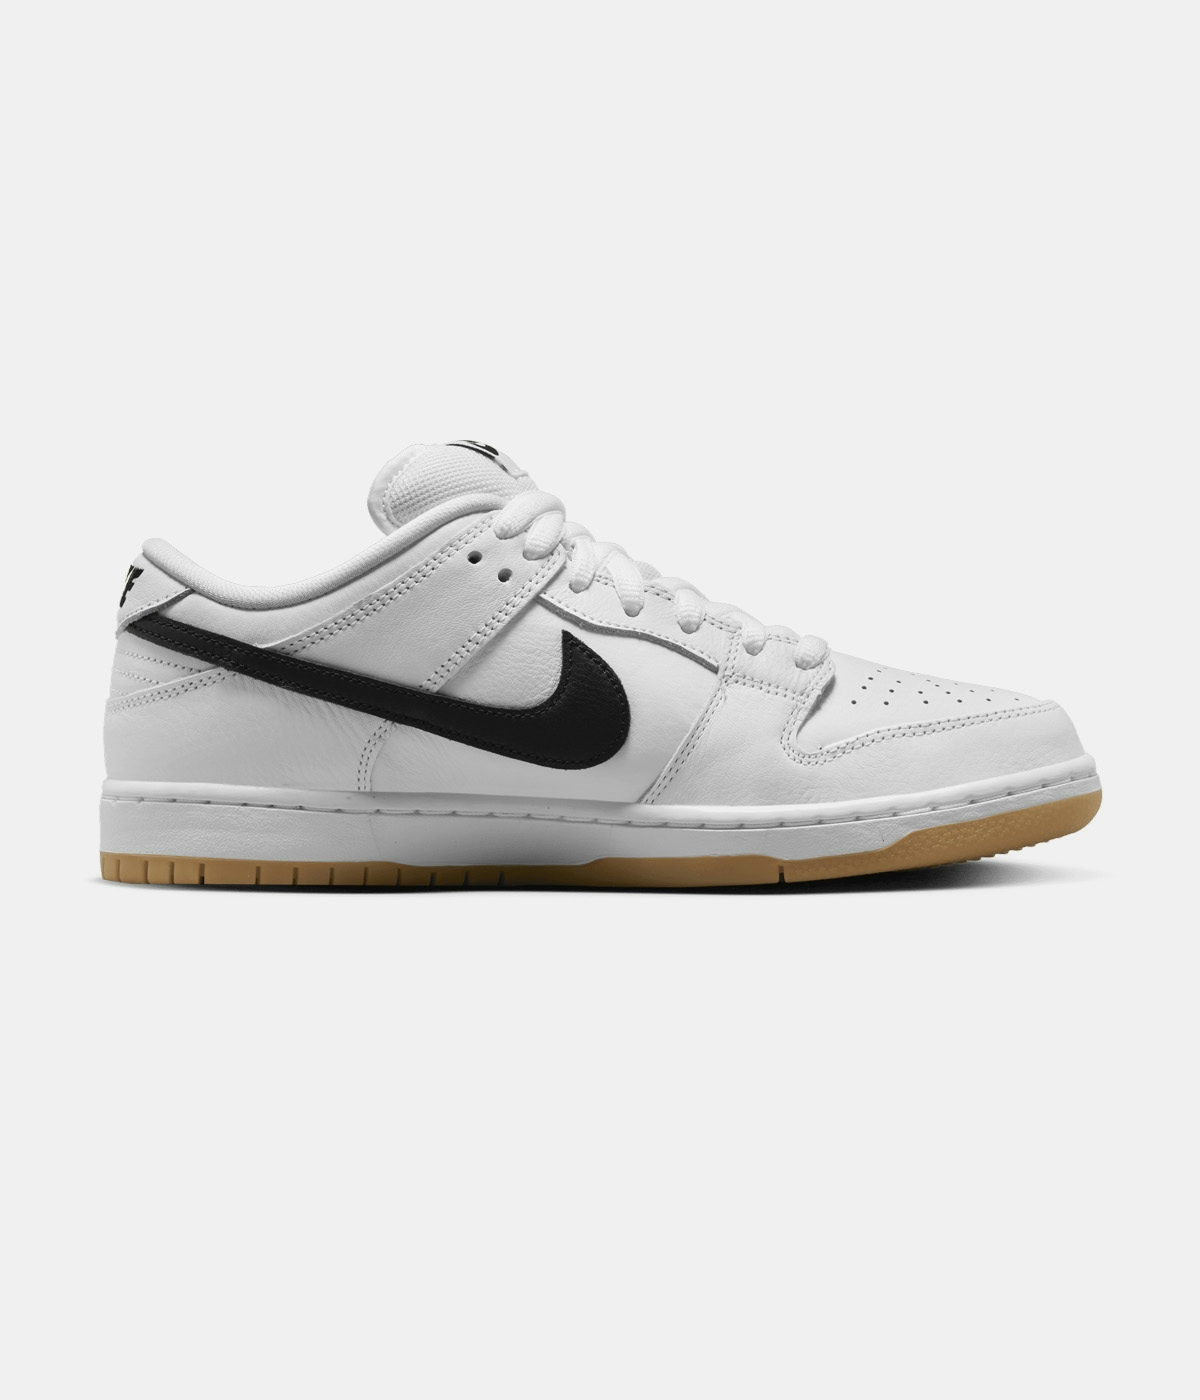 Vintage & Second Hand Nike SB - Dunk Low Pro Sneakers White/Black 3